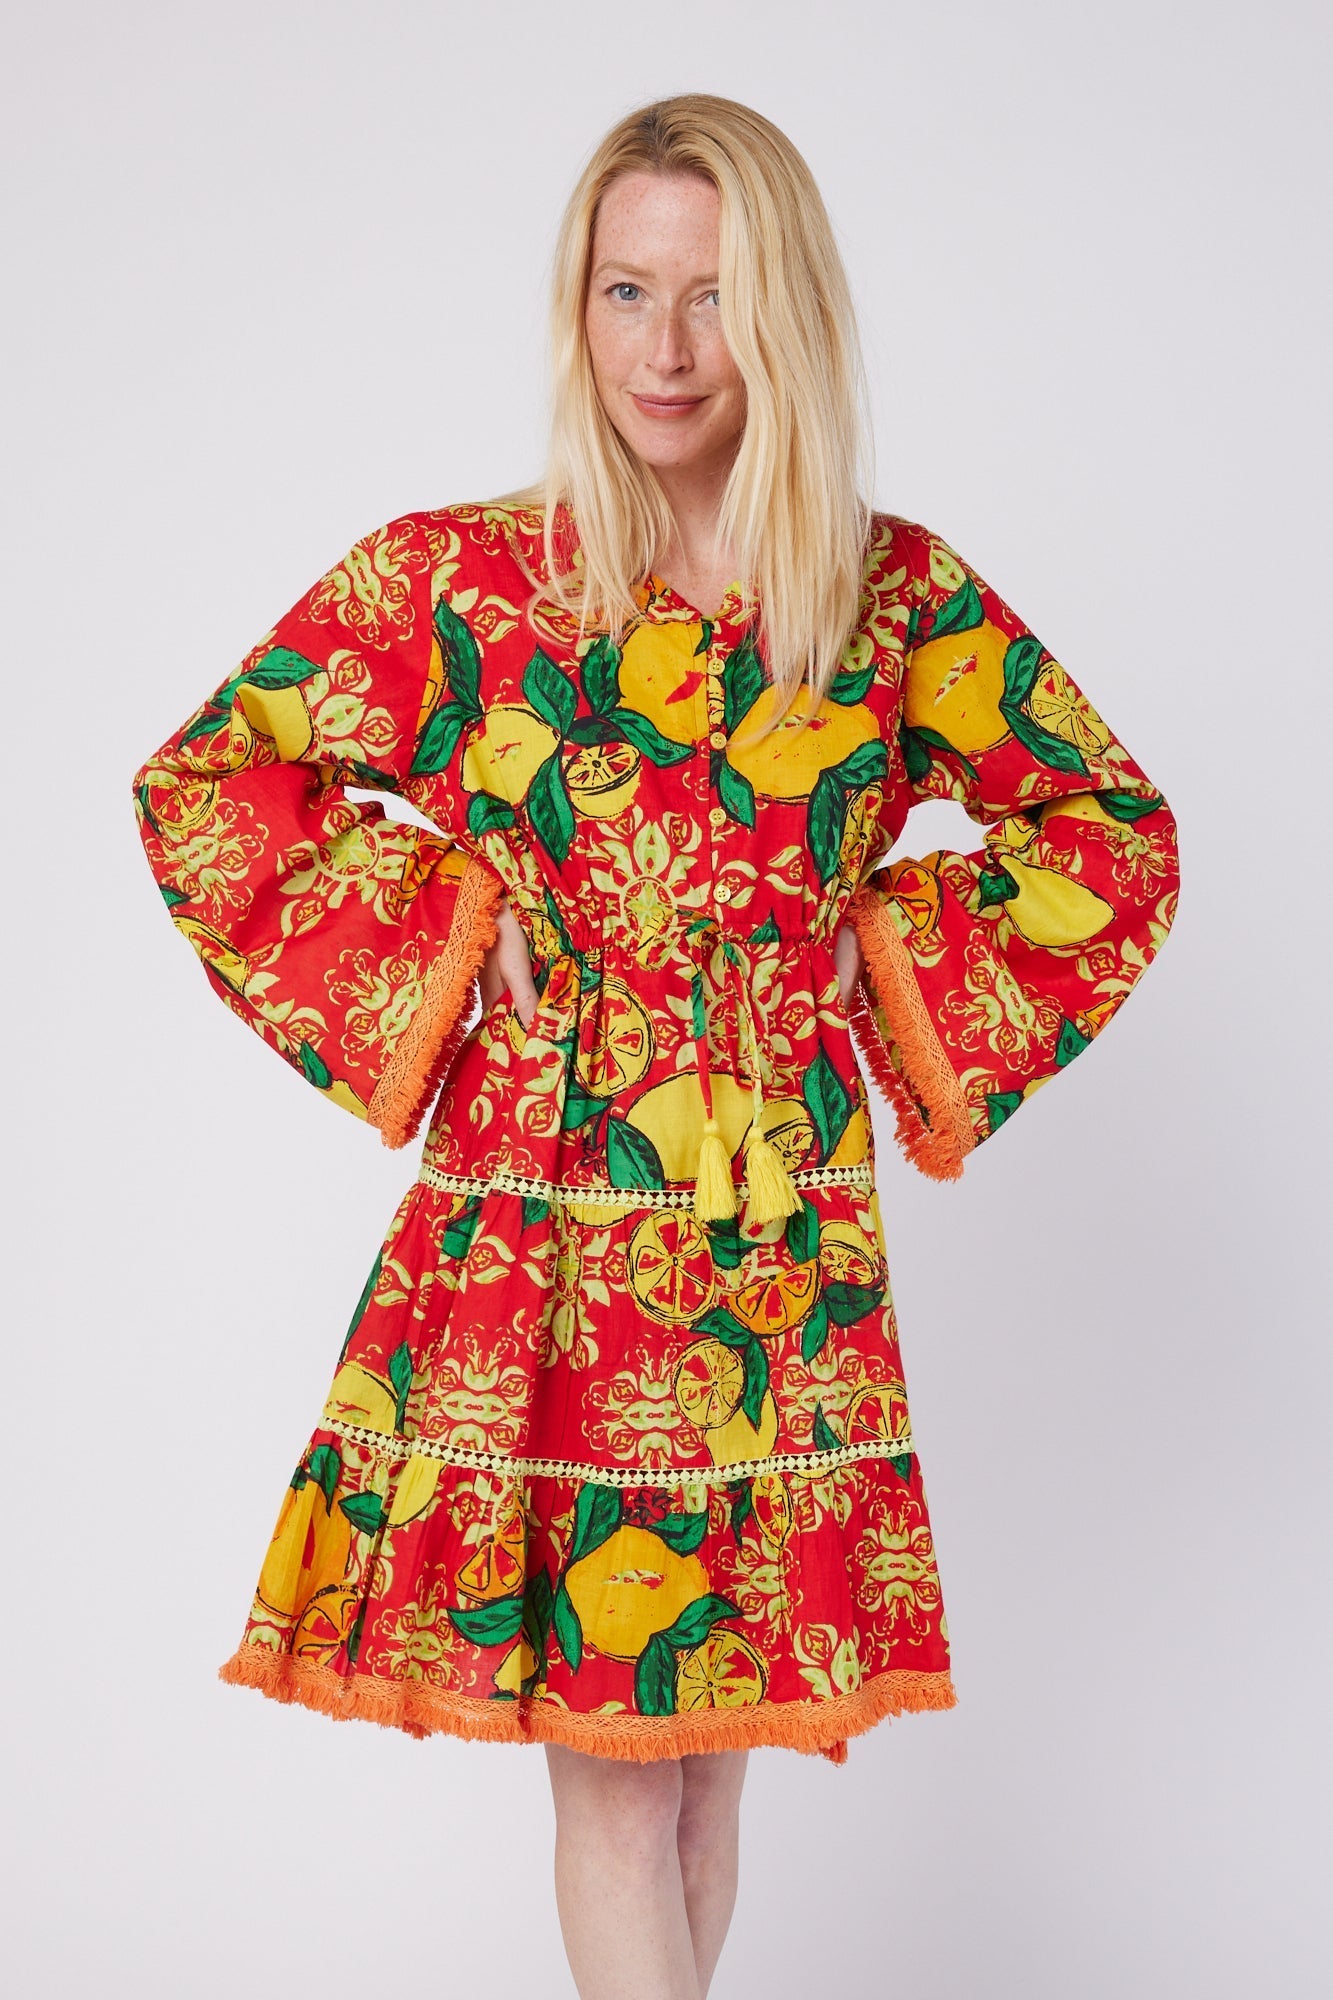 ModaPosa Desideria Wide Bell Sleeve Drawstring Empire Knee Length Dress in Red Citrus Majolica . Discover women's resort dresses and lifestyle clothing inspired by the Mediterranean. Free worldwide shipping available!